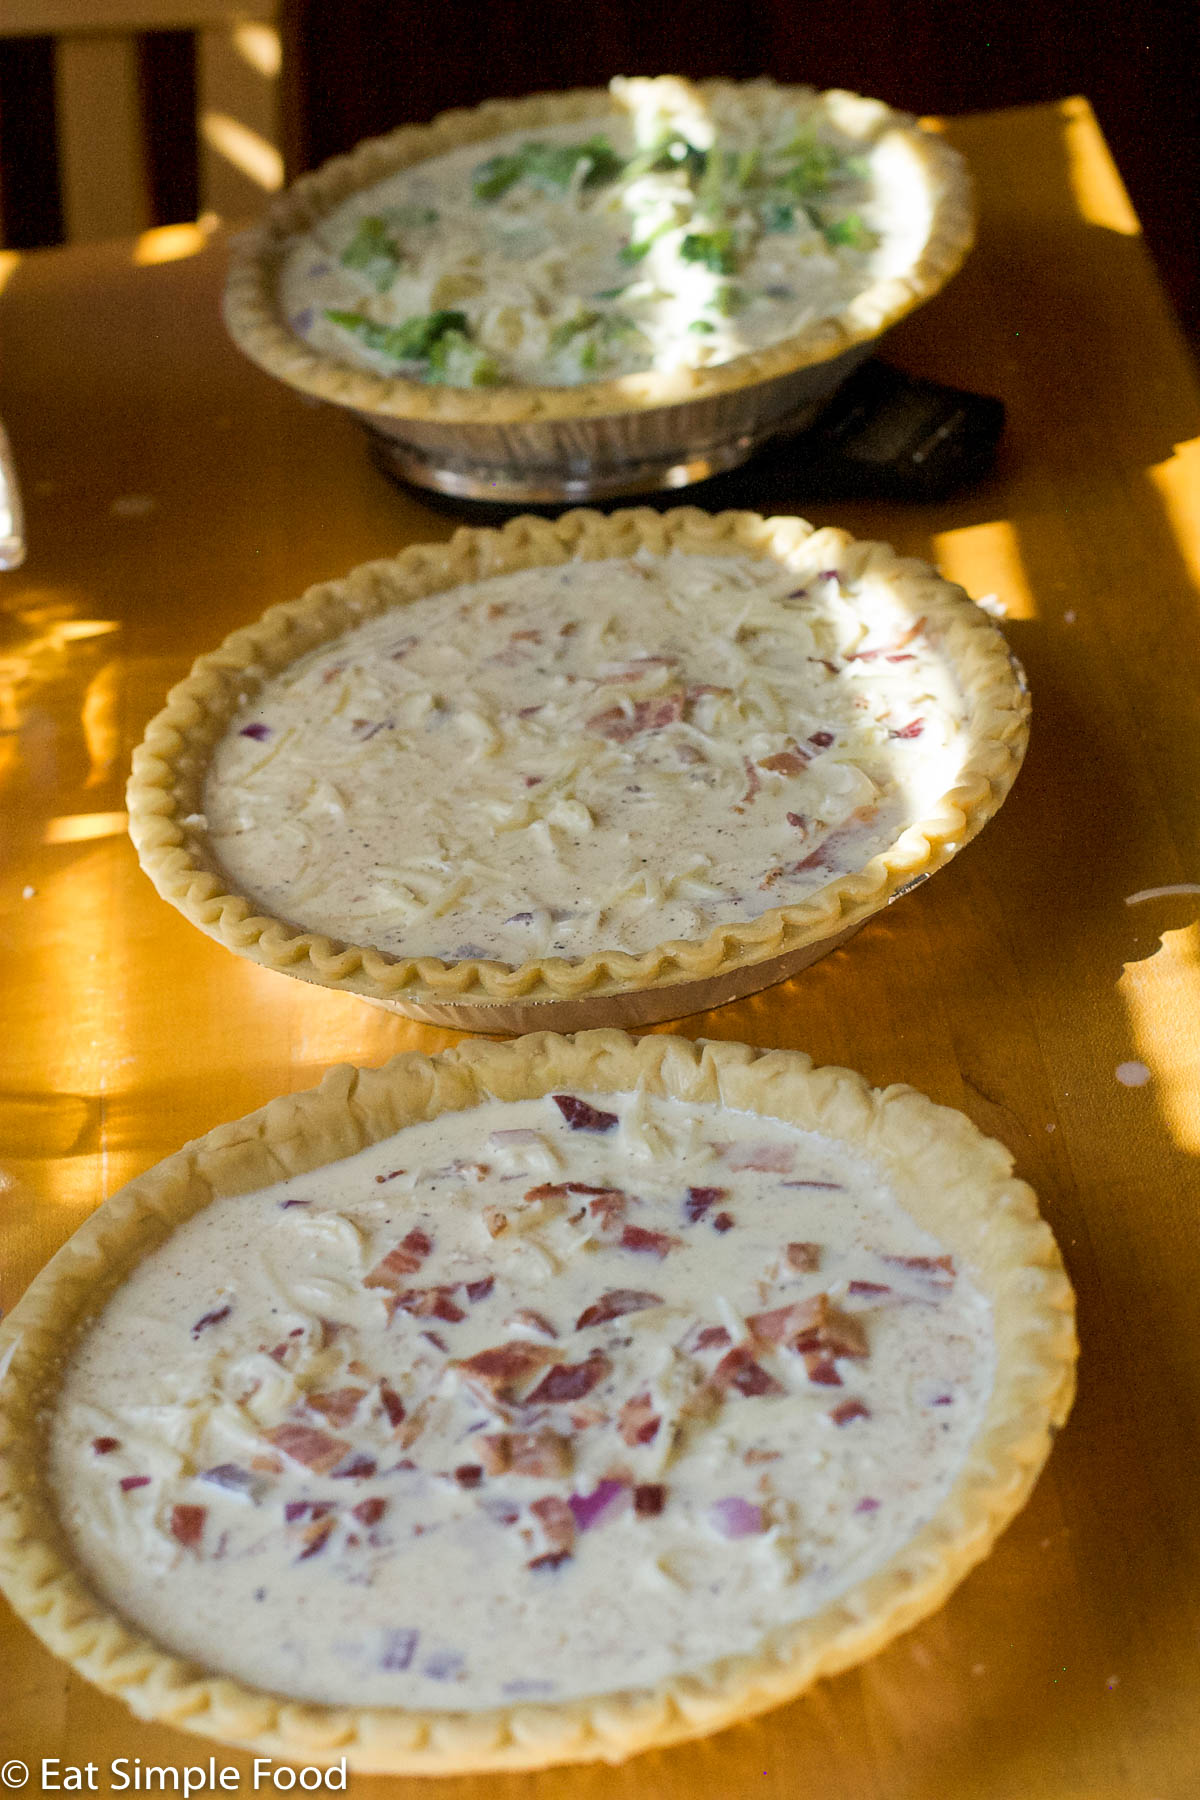 3 quiches on a wood table filled but not cooked yet. One quiche is on a scale.